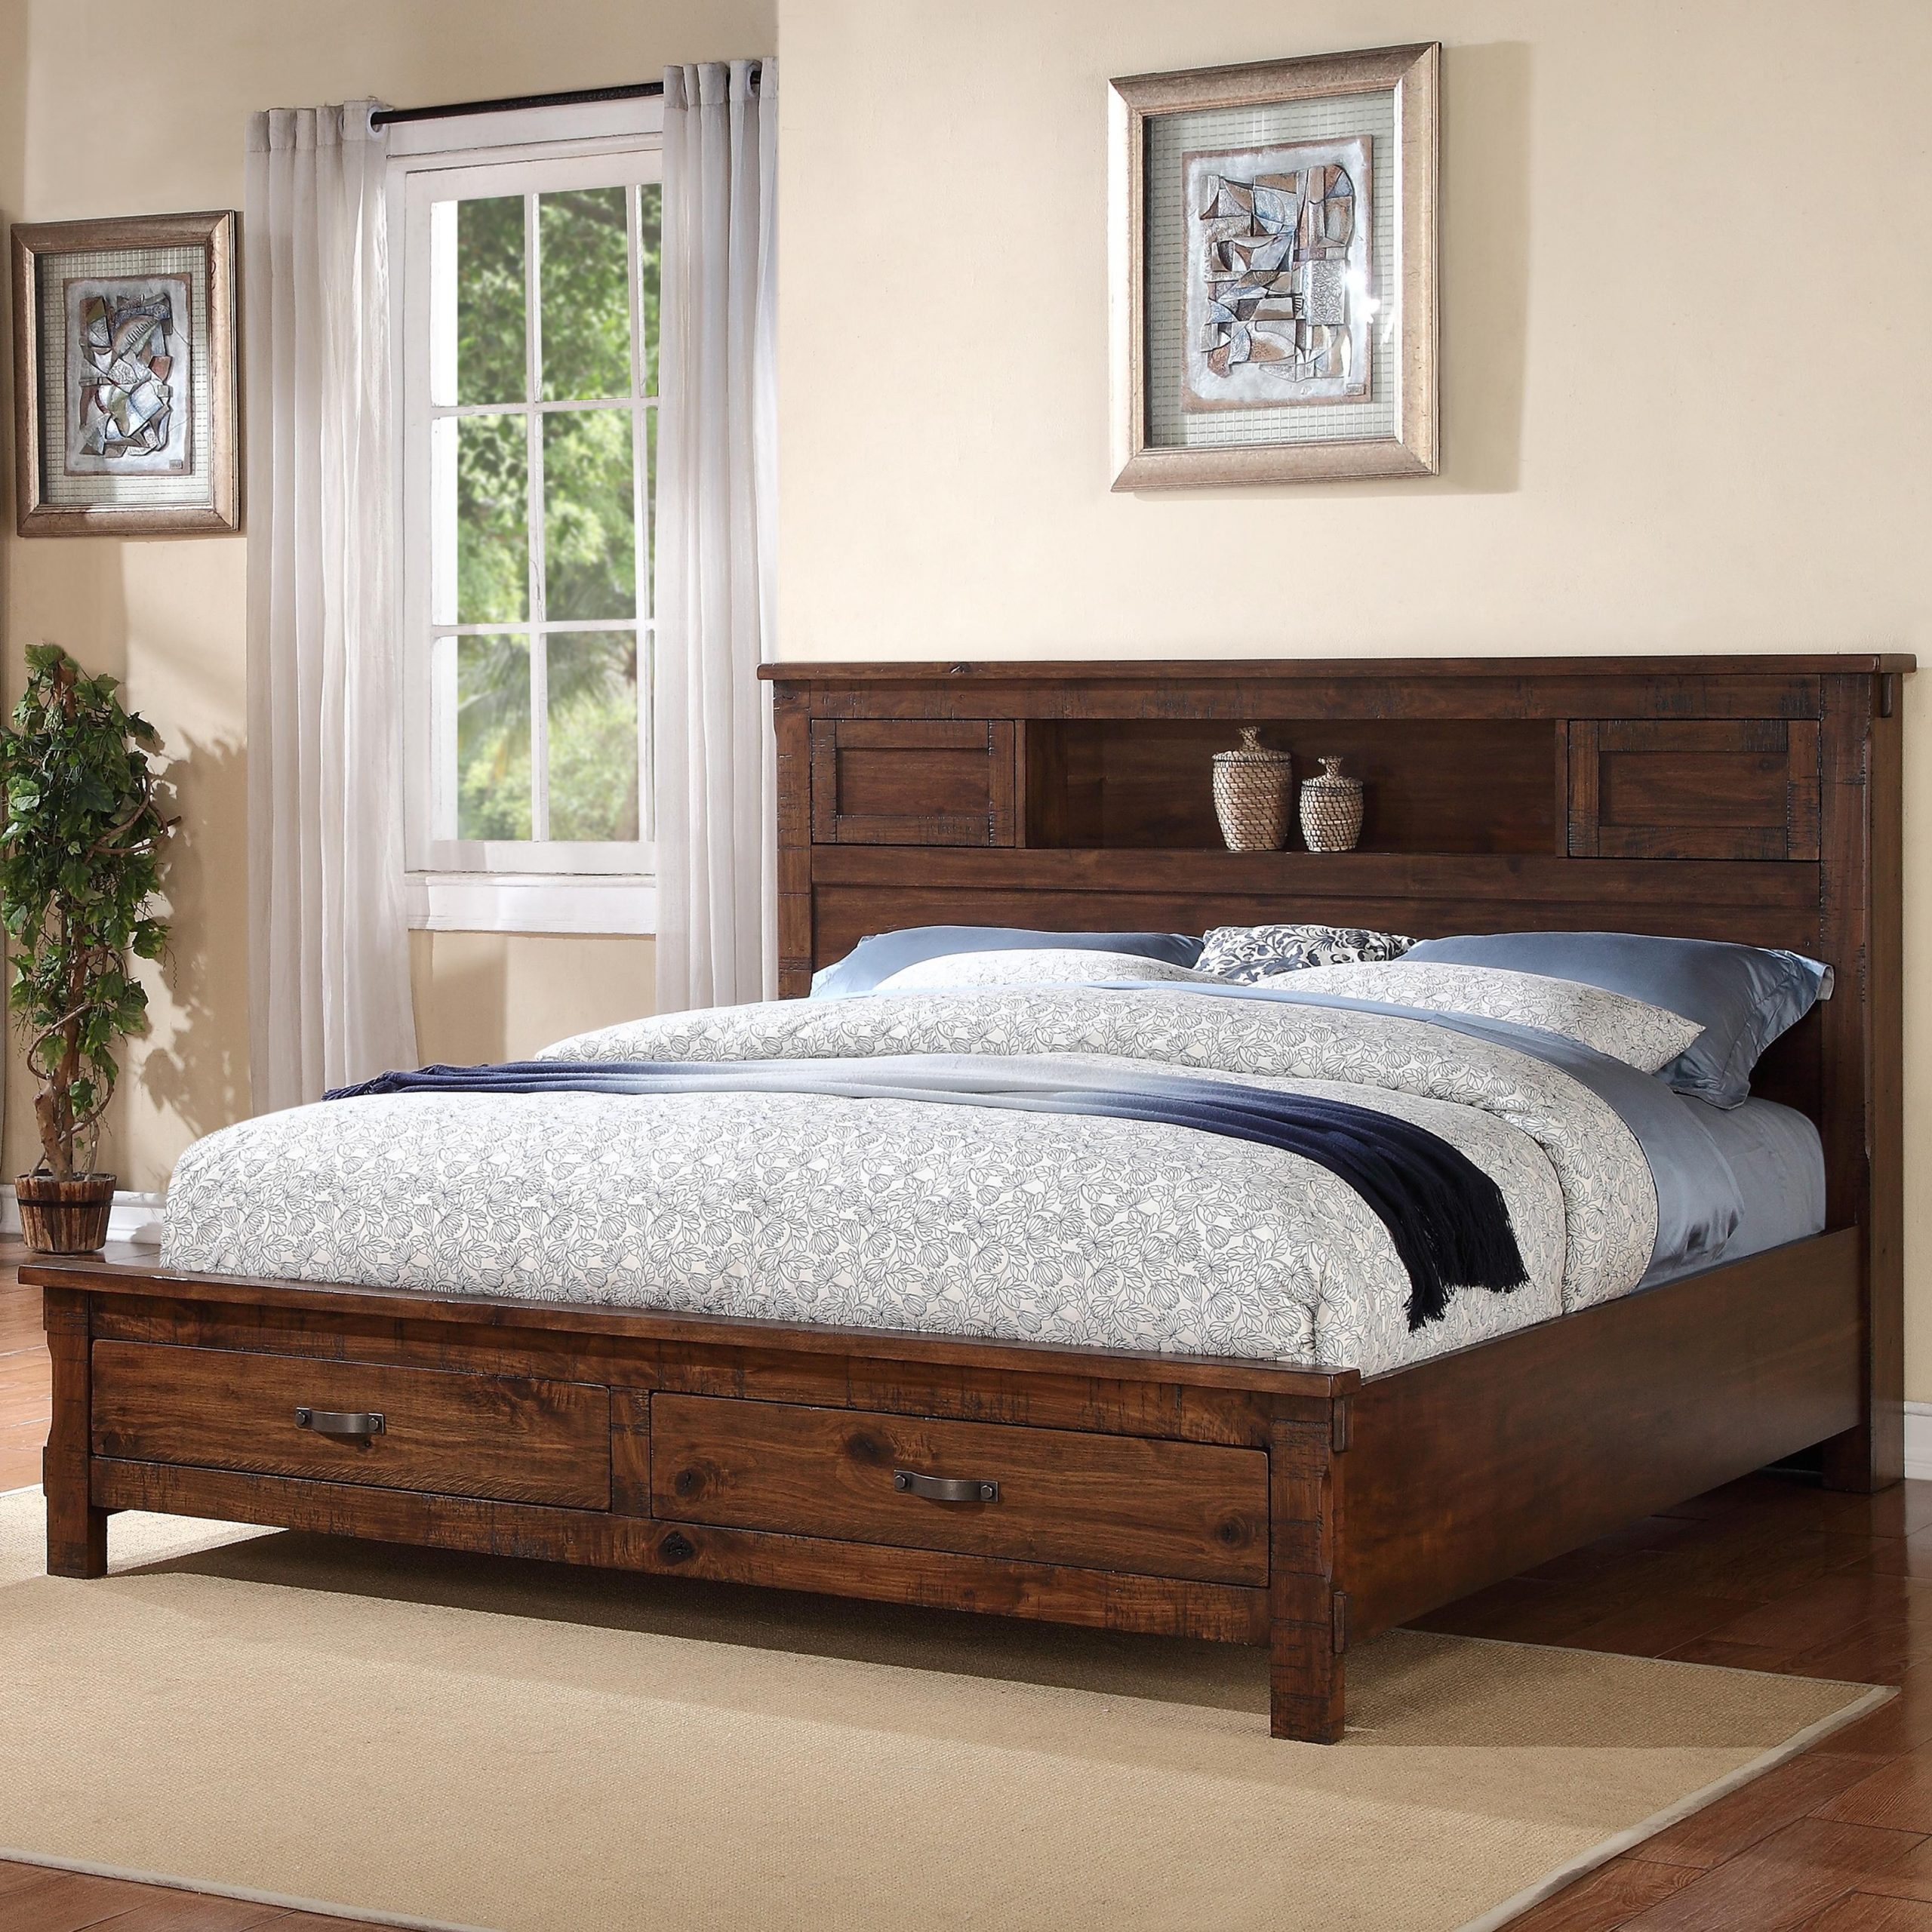 California King Size Bed Frames With Storage / Waterbed Magnolia HB or ...